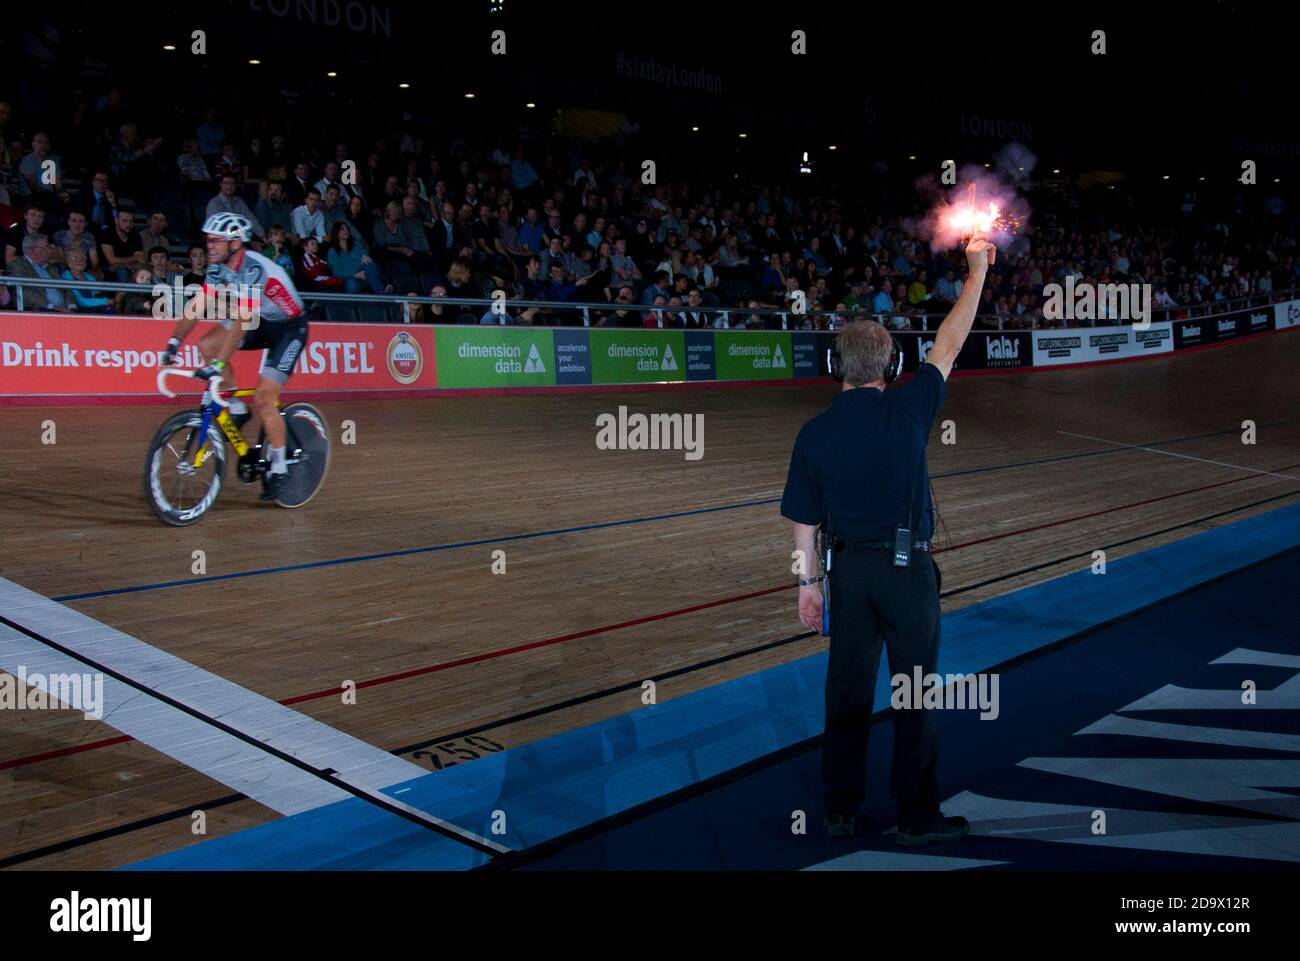 The Commissaire fires the starting pistol. Riders were taking part in the Six Day track cycling championship at Lee Valley Velodrome, London, UK. Stock Photo